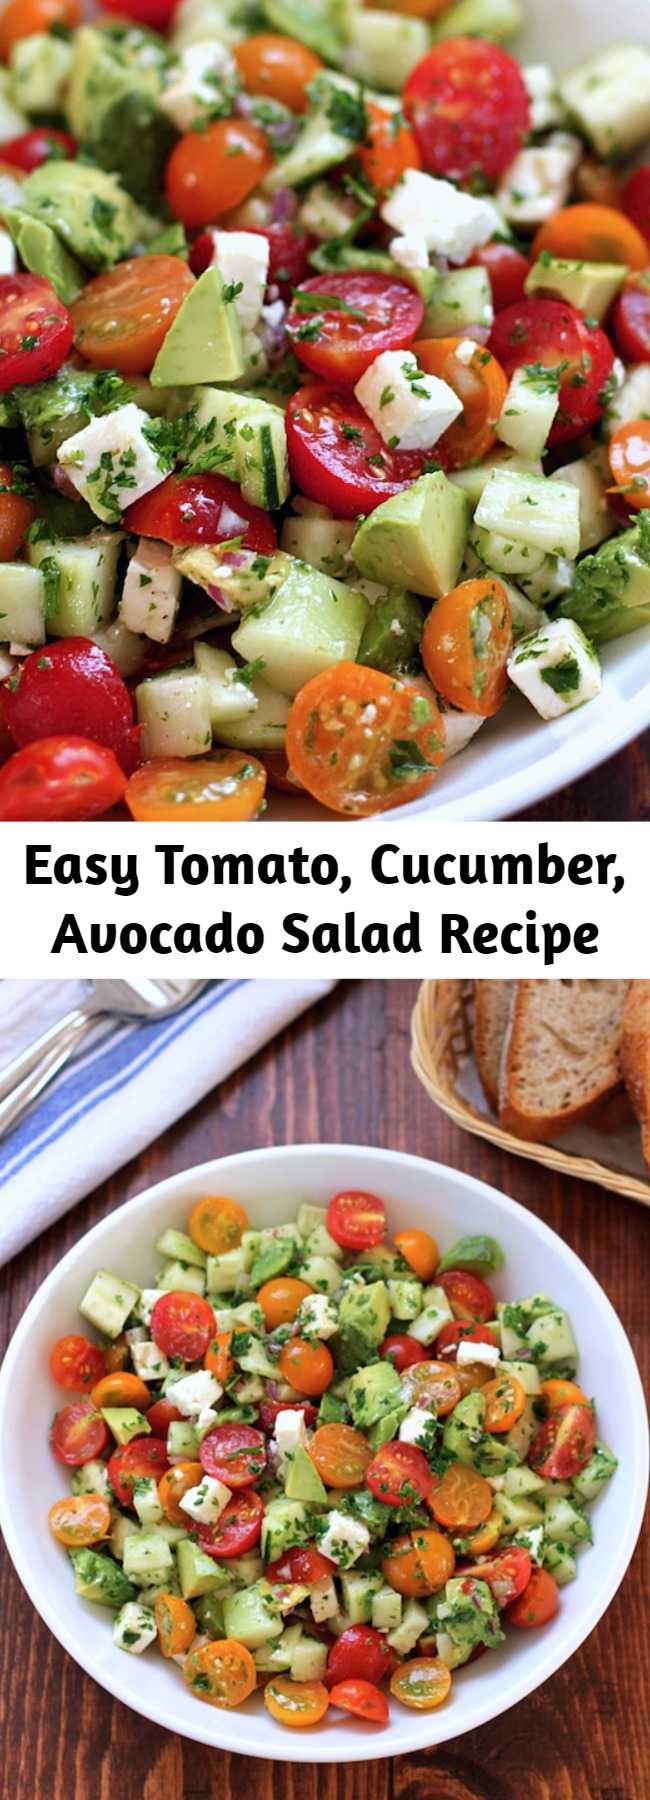 Easy Tomato, Cucumber, Avocado Salad Recipe - This tomato, cucumber, avocado salad is an easy, flavorful summer salad.  It’s crunchy, fresh and simple to make.  It’s a family favorite and ready in less than 15 minutes.